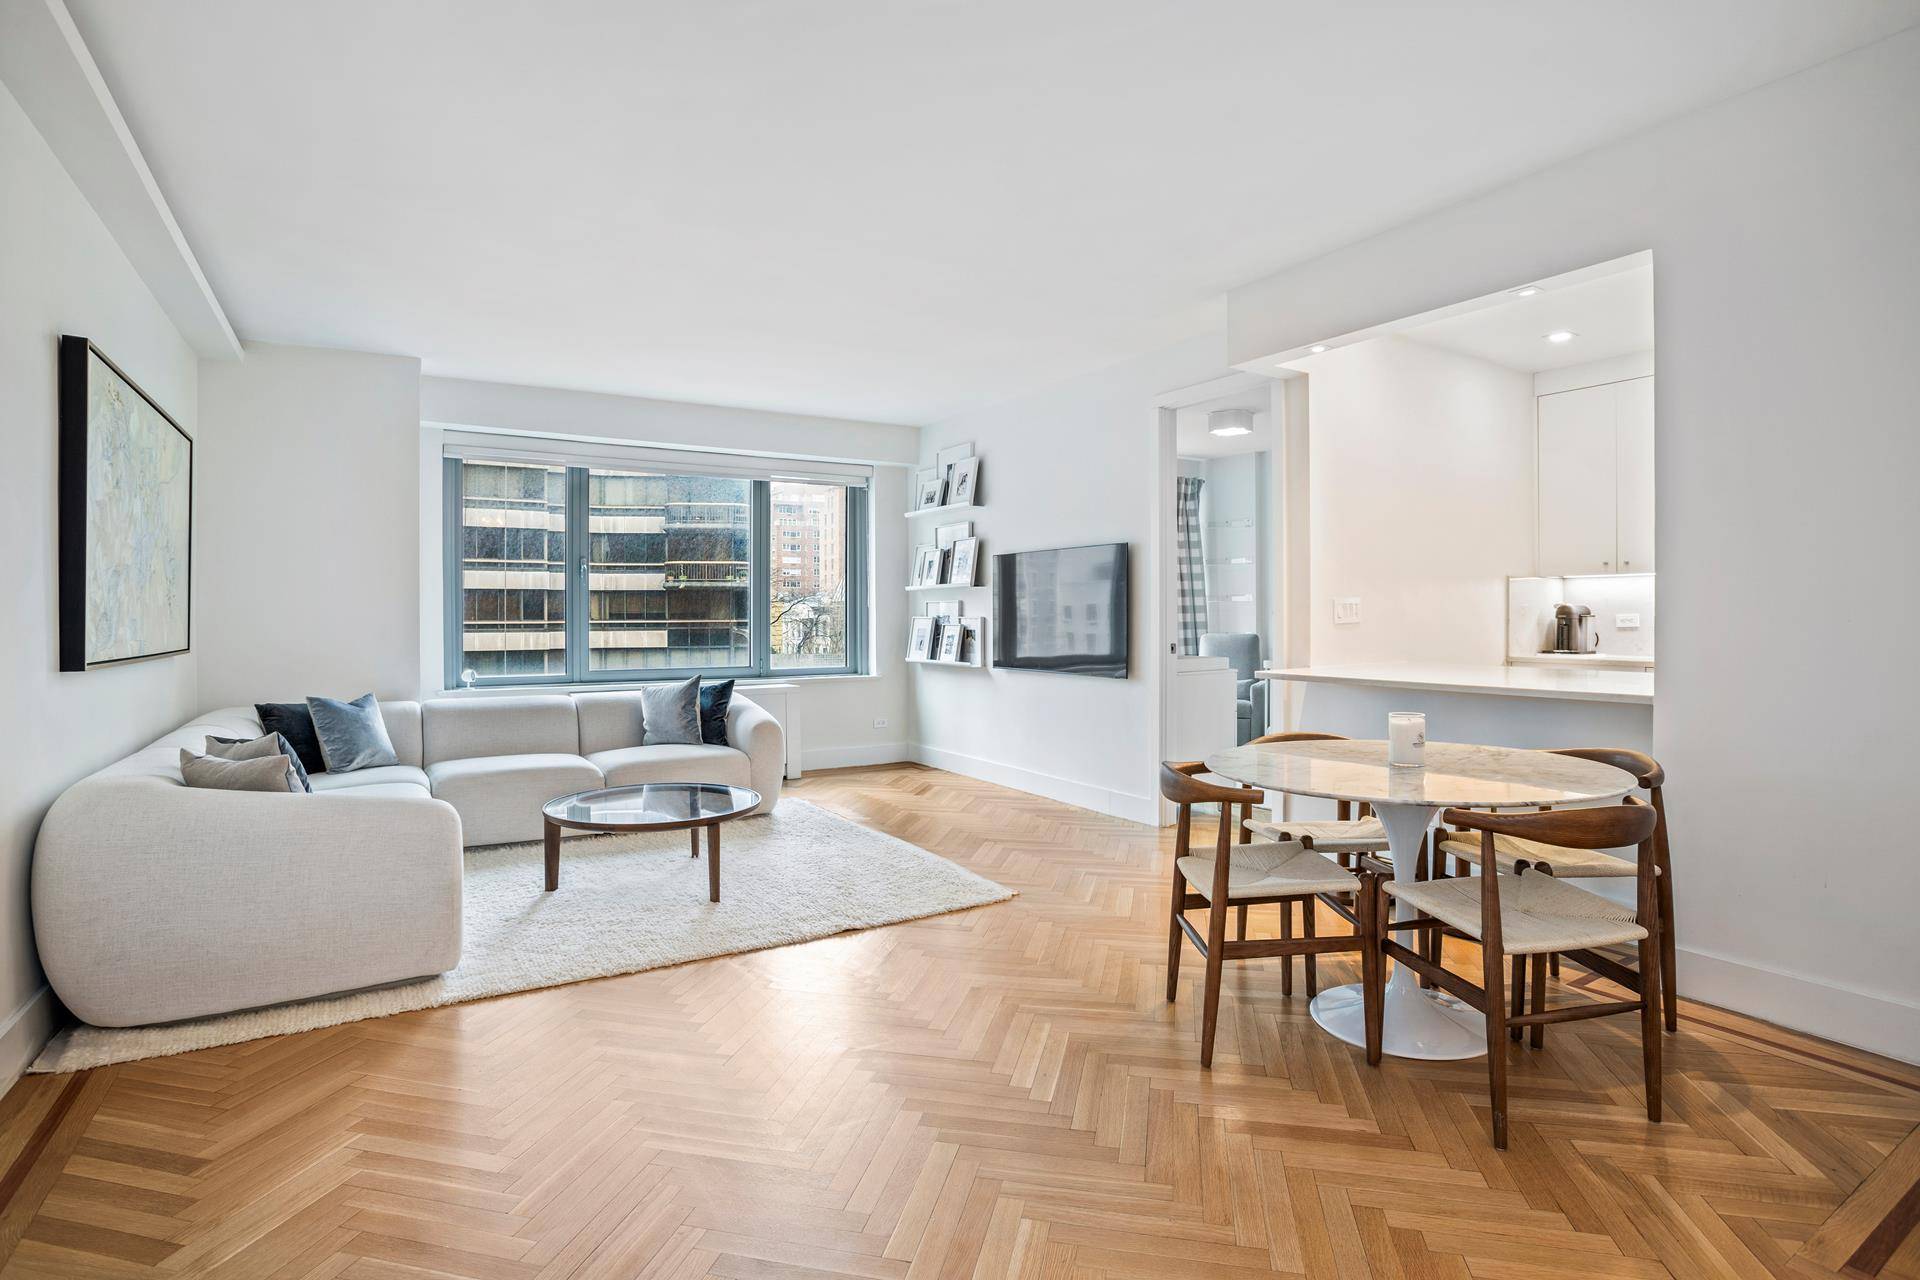 Immaculate 2 bedroom 2 bathroom apartment in the highly sought after luxury condominium, 200 East 62nd Street.